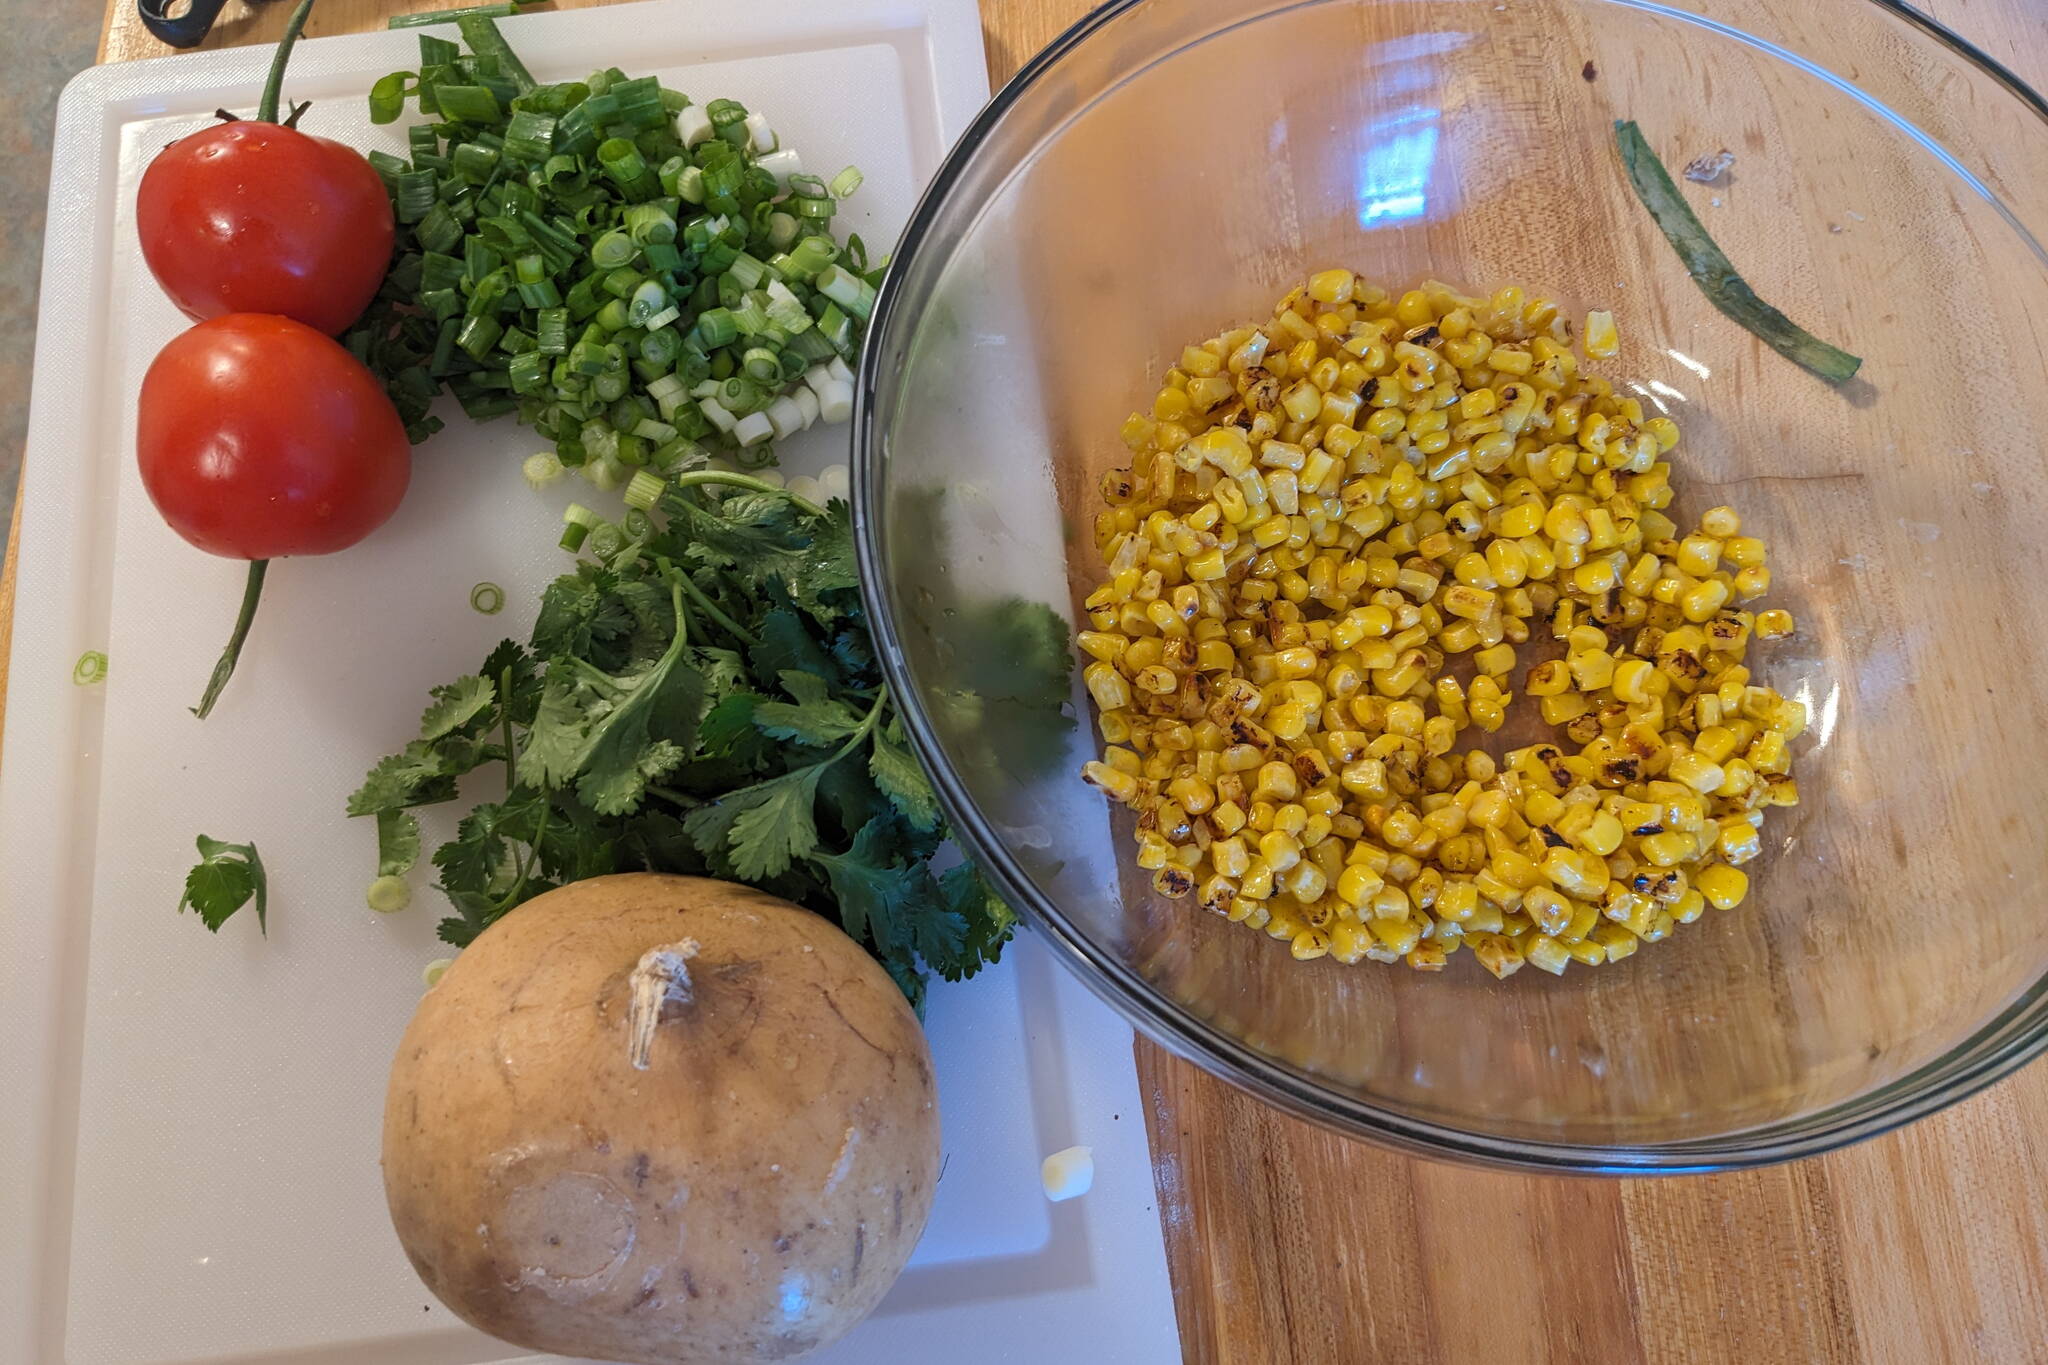 Salad ingredients ready to assemble. (Photo by Patty Schied)